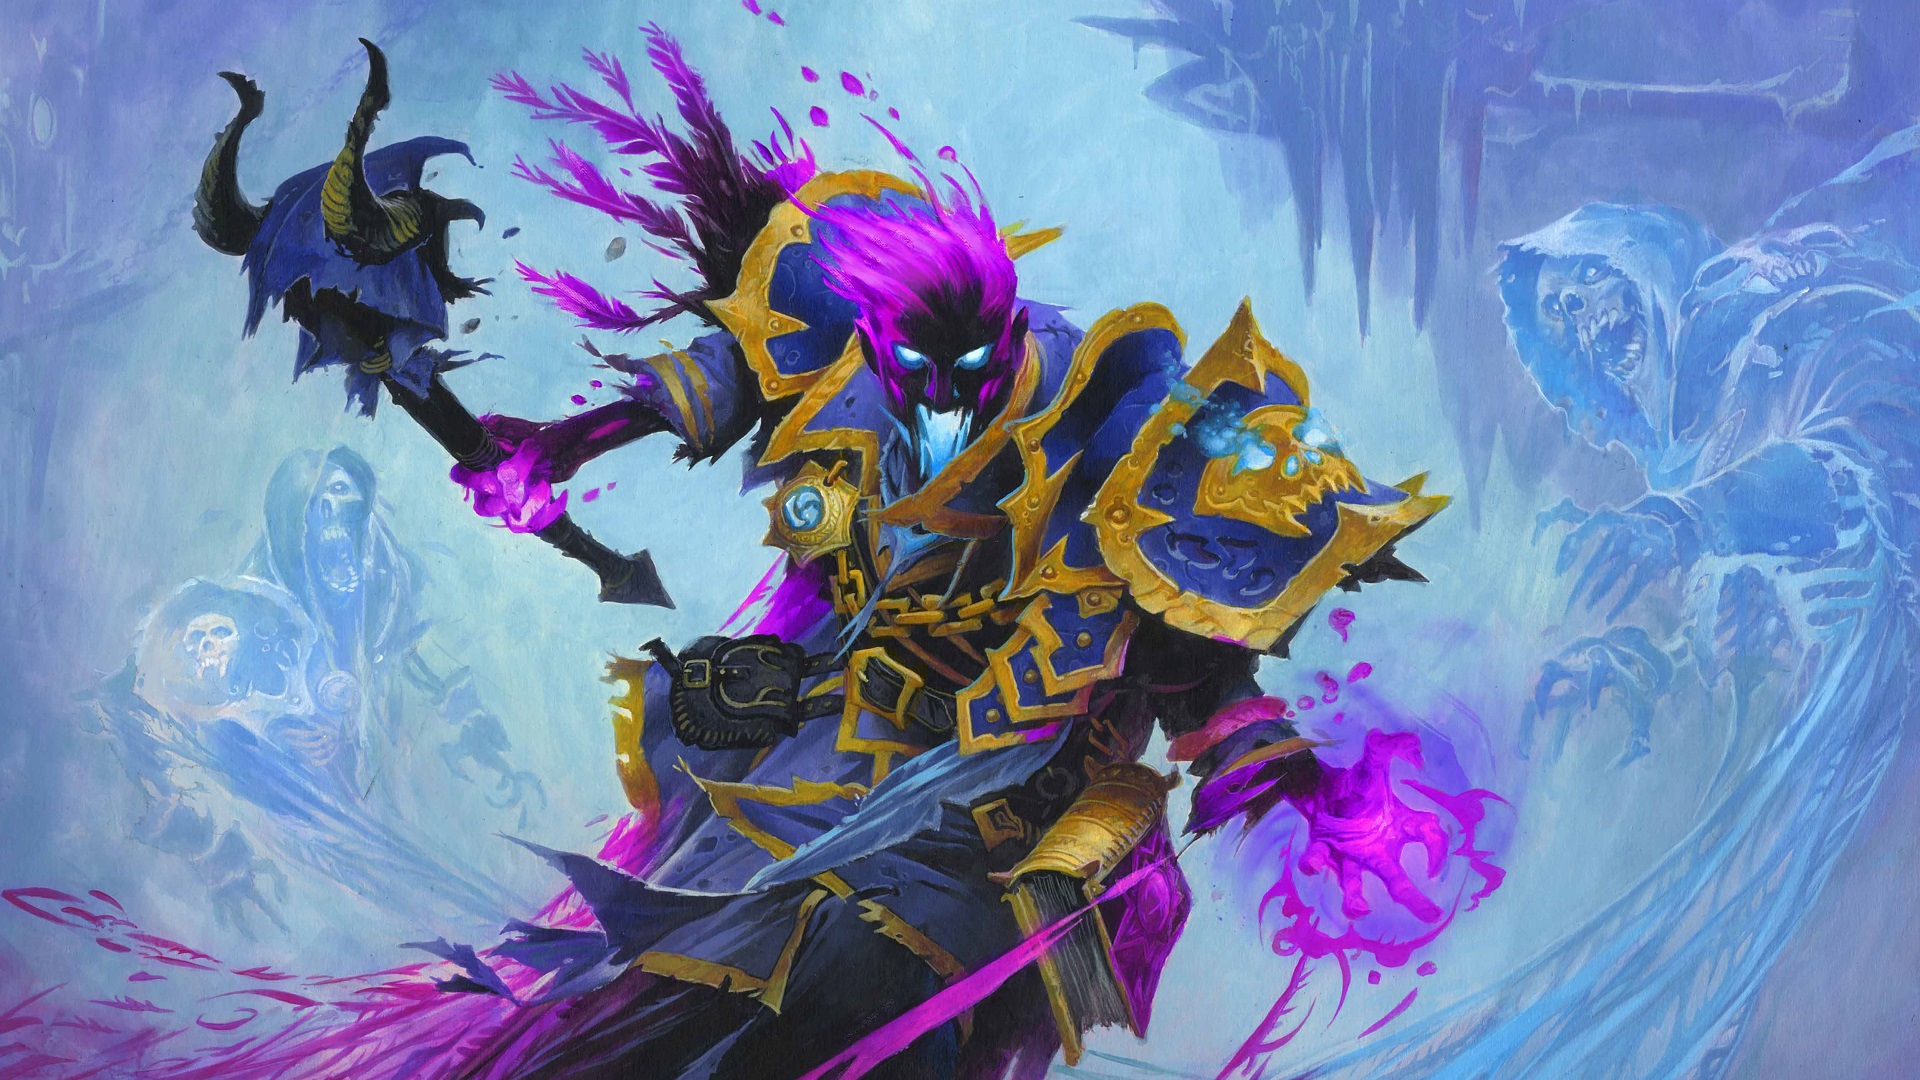 Hearthstone: Heroes of Warcraft, Hearthstone, Warcraft, Cards, Artwork, Knights of the frozen throne, Death Knight, Anduin Wrynn, Video games Wallpaper